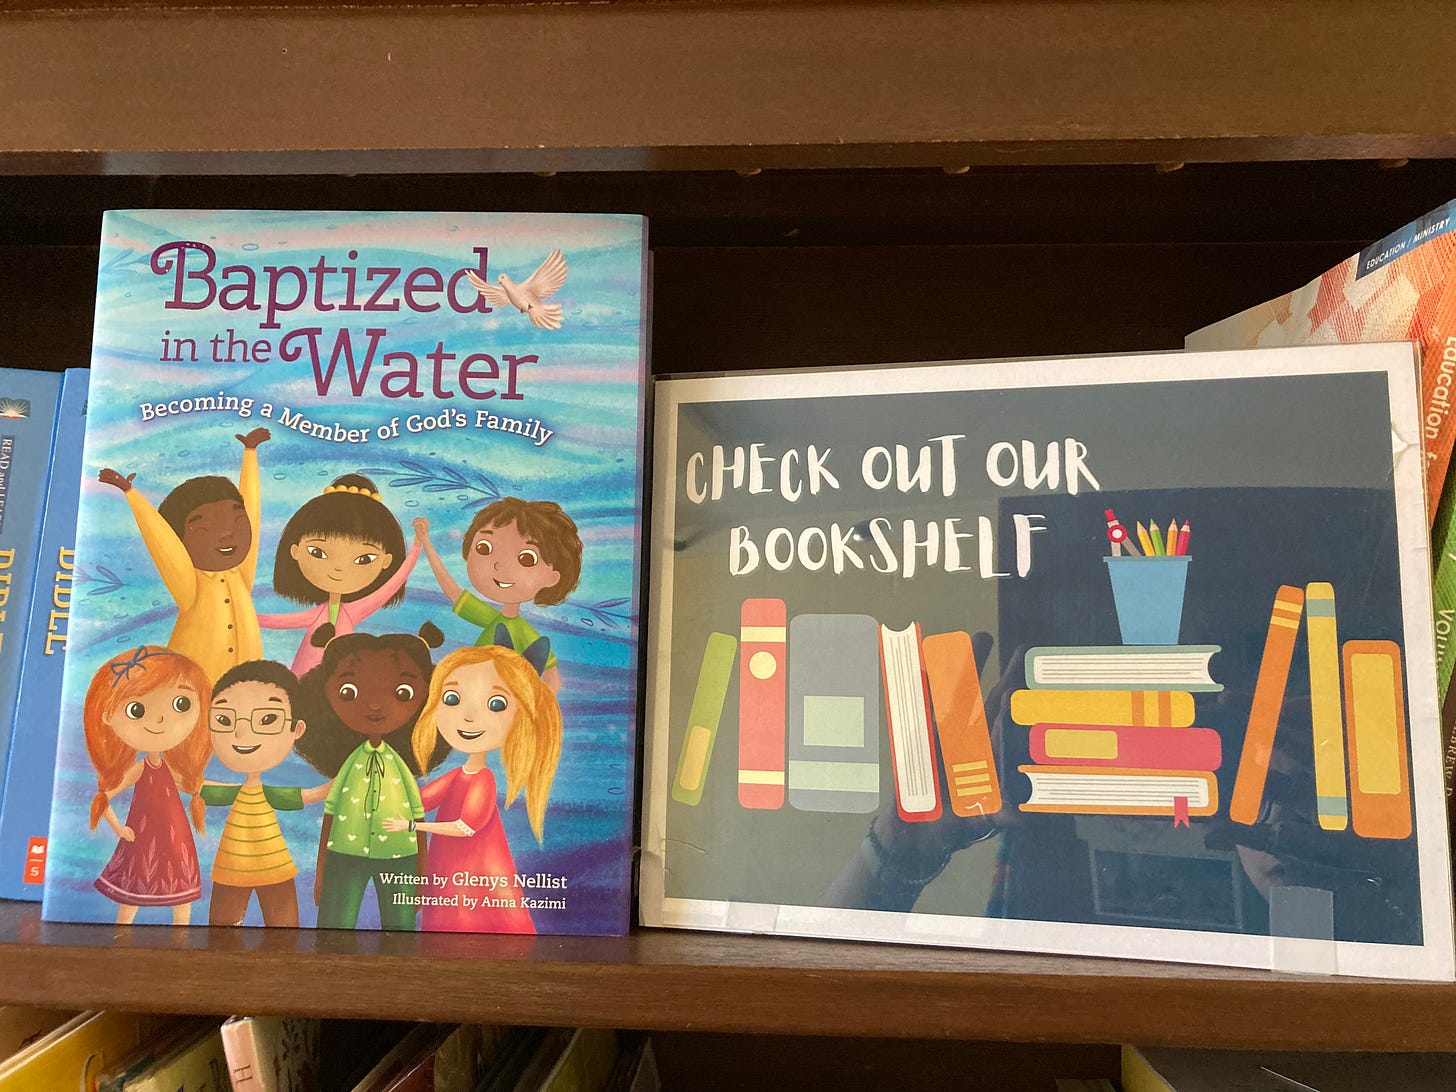 A copy of the children's book Baptized in the Water stands on a shelf next to a sign reading Check Our Our Bookshelf.